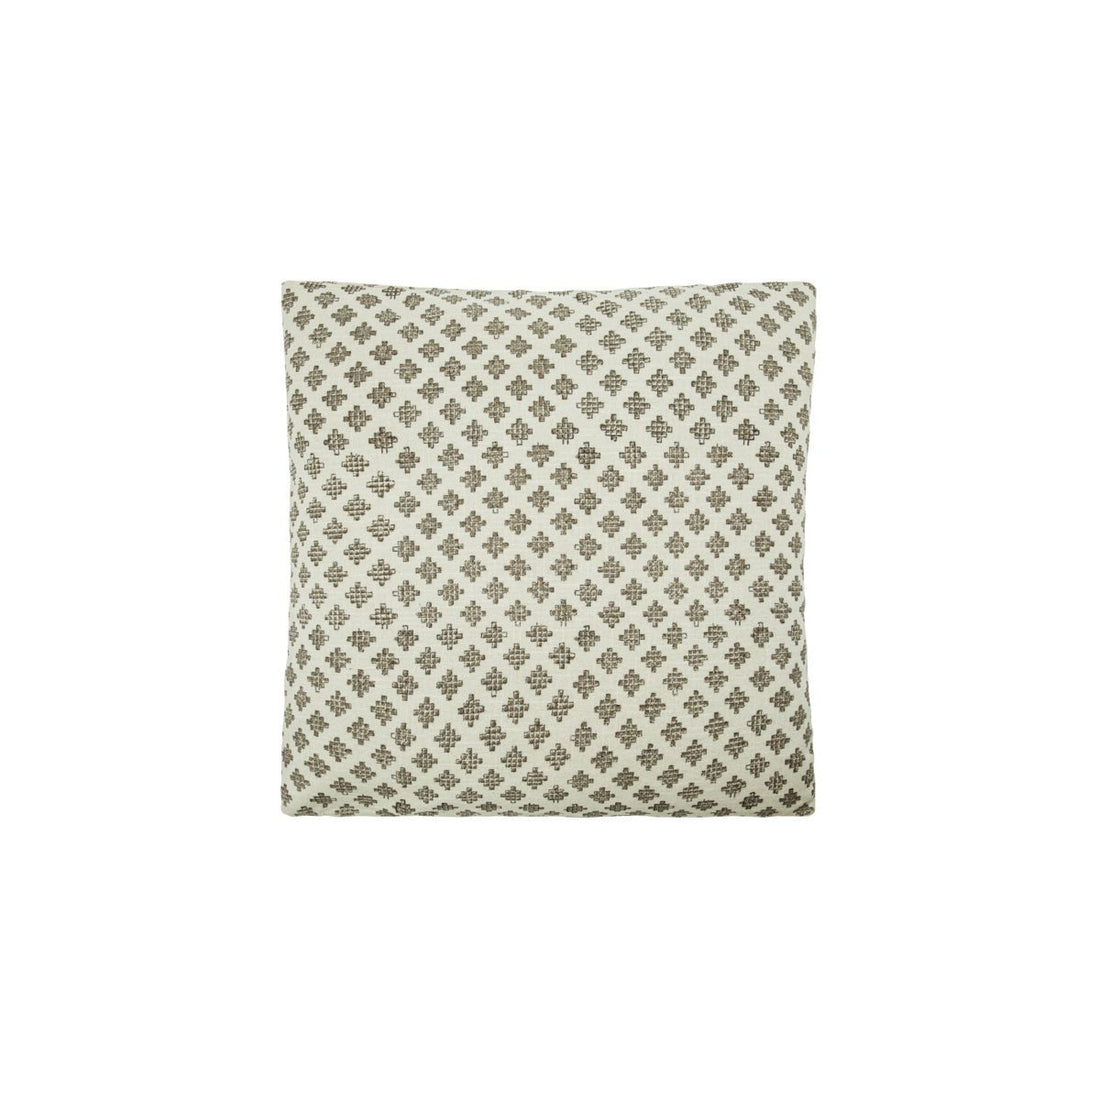 House Doctor Pillow Covers, Mari, Beige